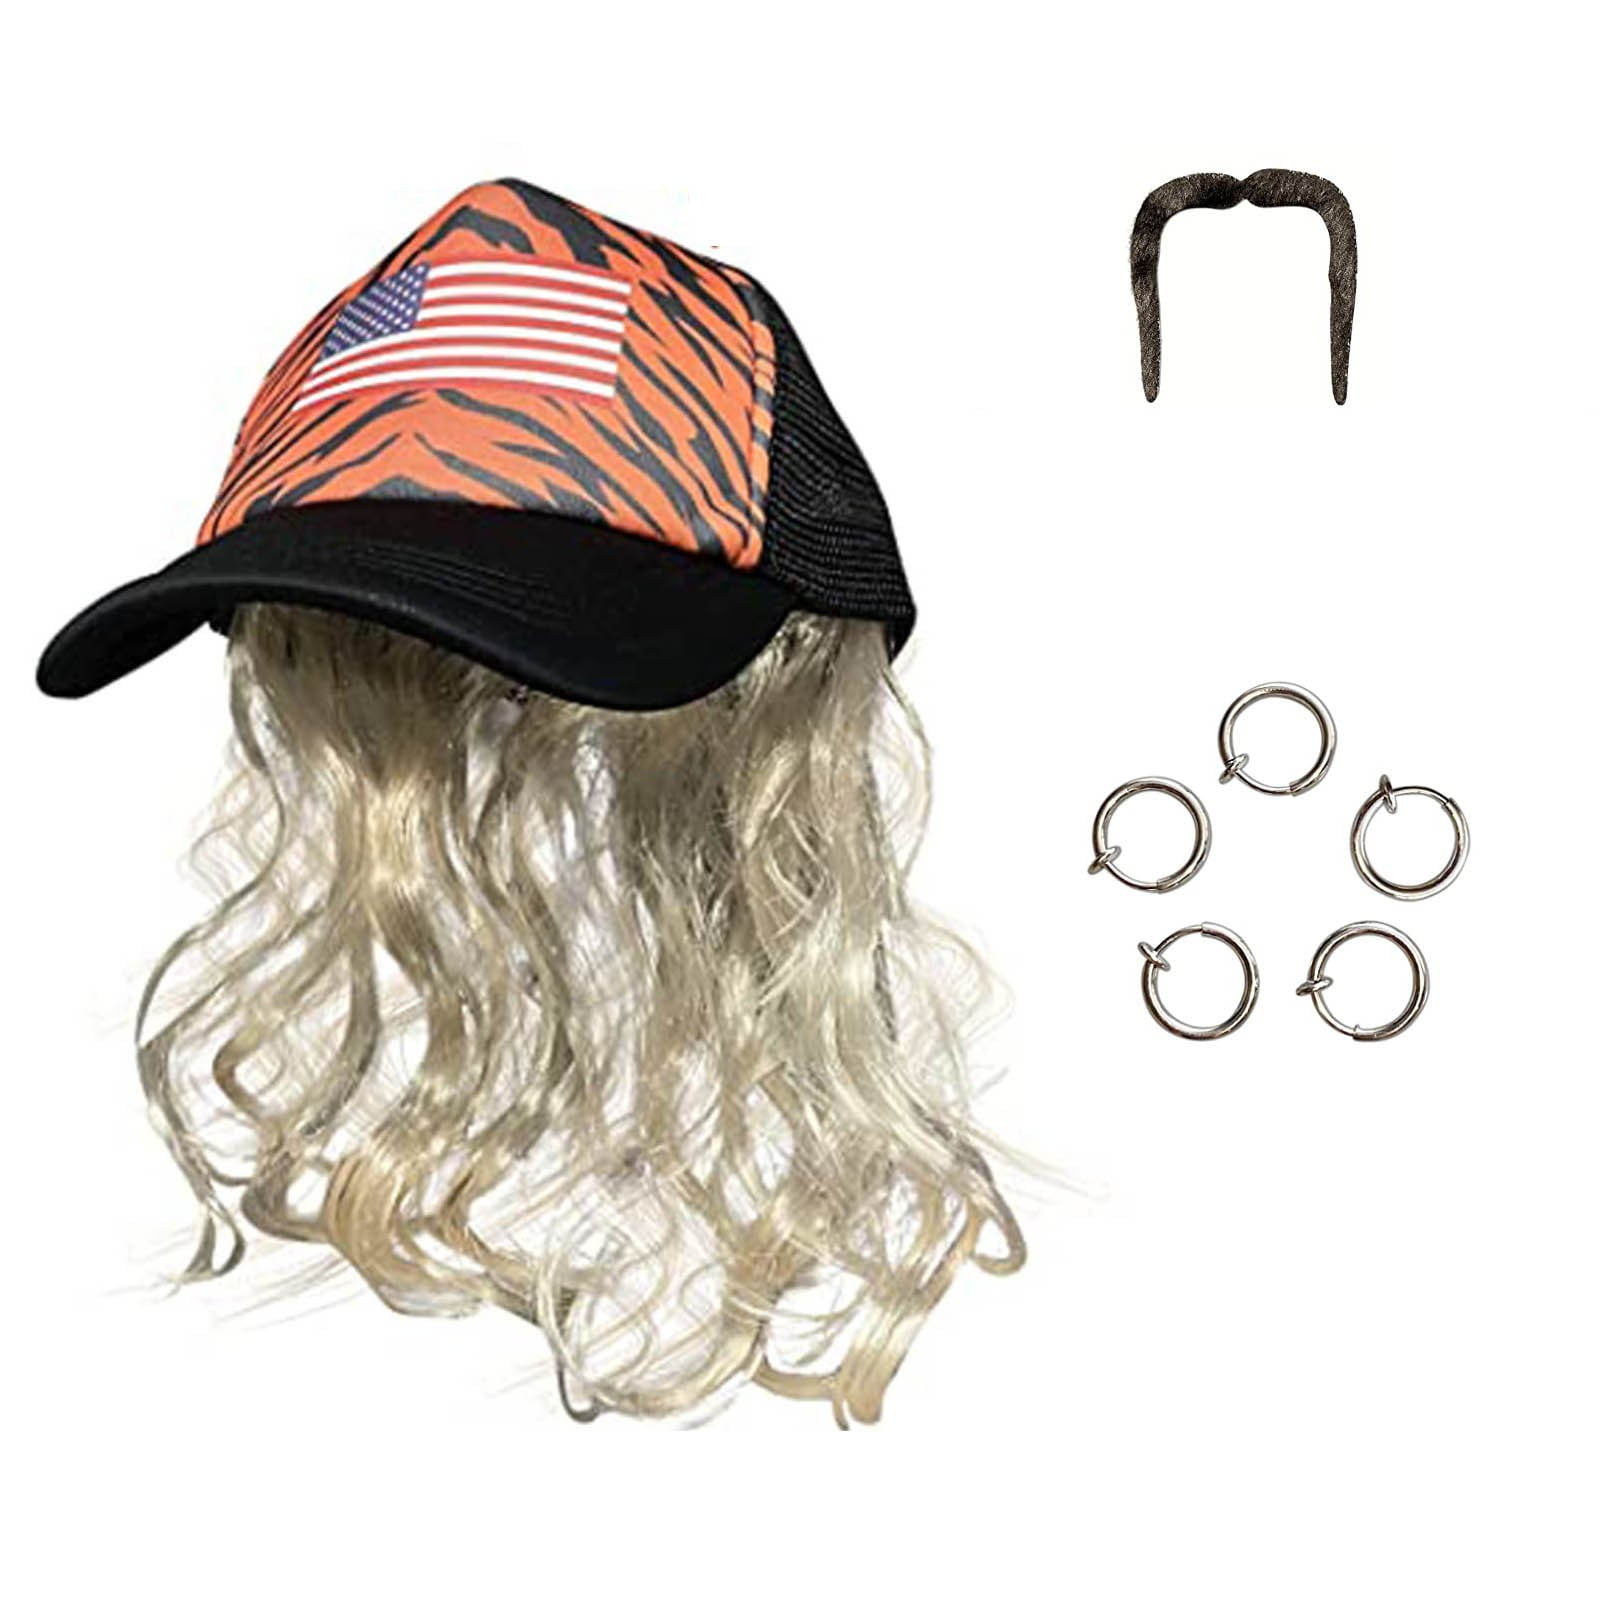 Kinky L Hats Hair With Attached Adjustable Baseball Curly Hair Baseball Cap Extensions Hair Synthetic With Fedora Wave Low Wig With Hat Profile A Wig Cap Hat - Hairpiece Women Baseball For